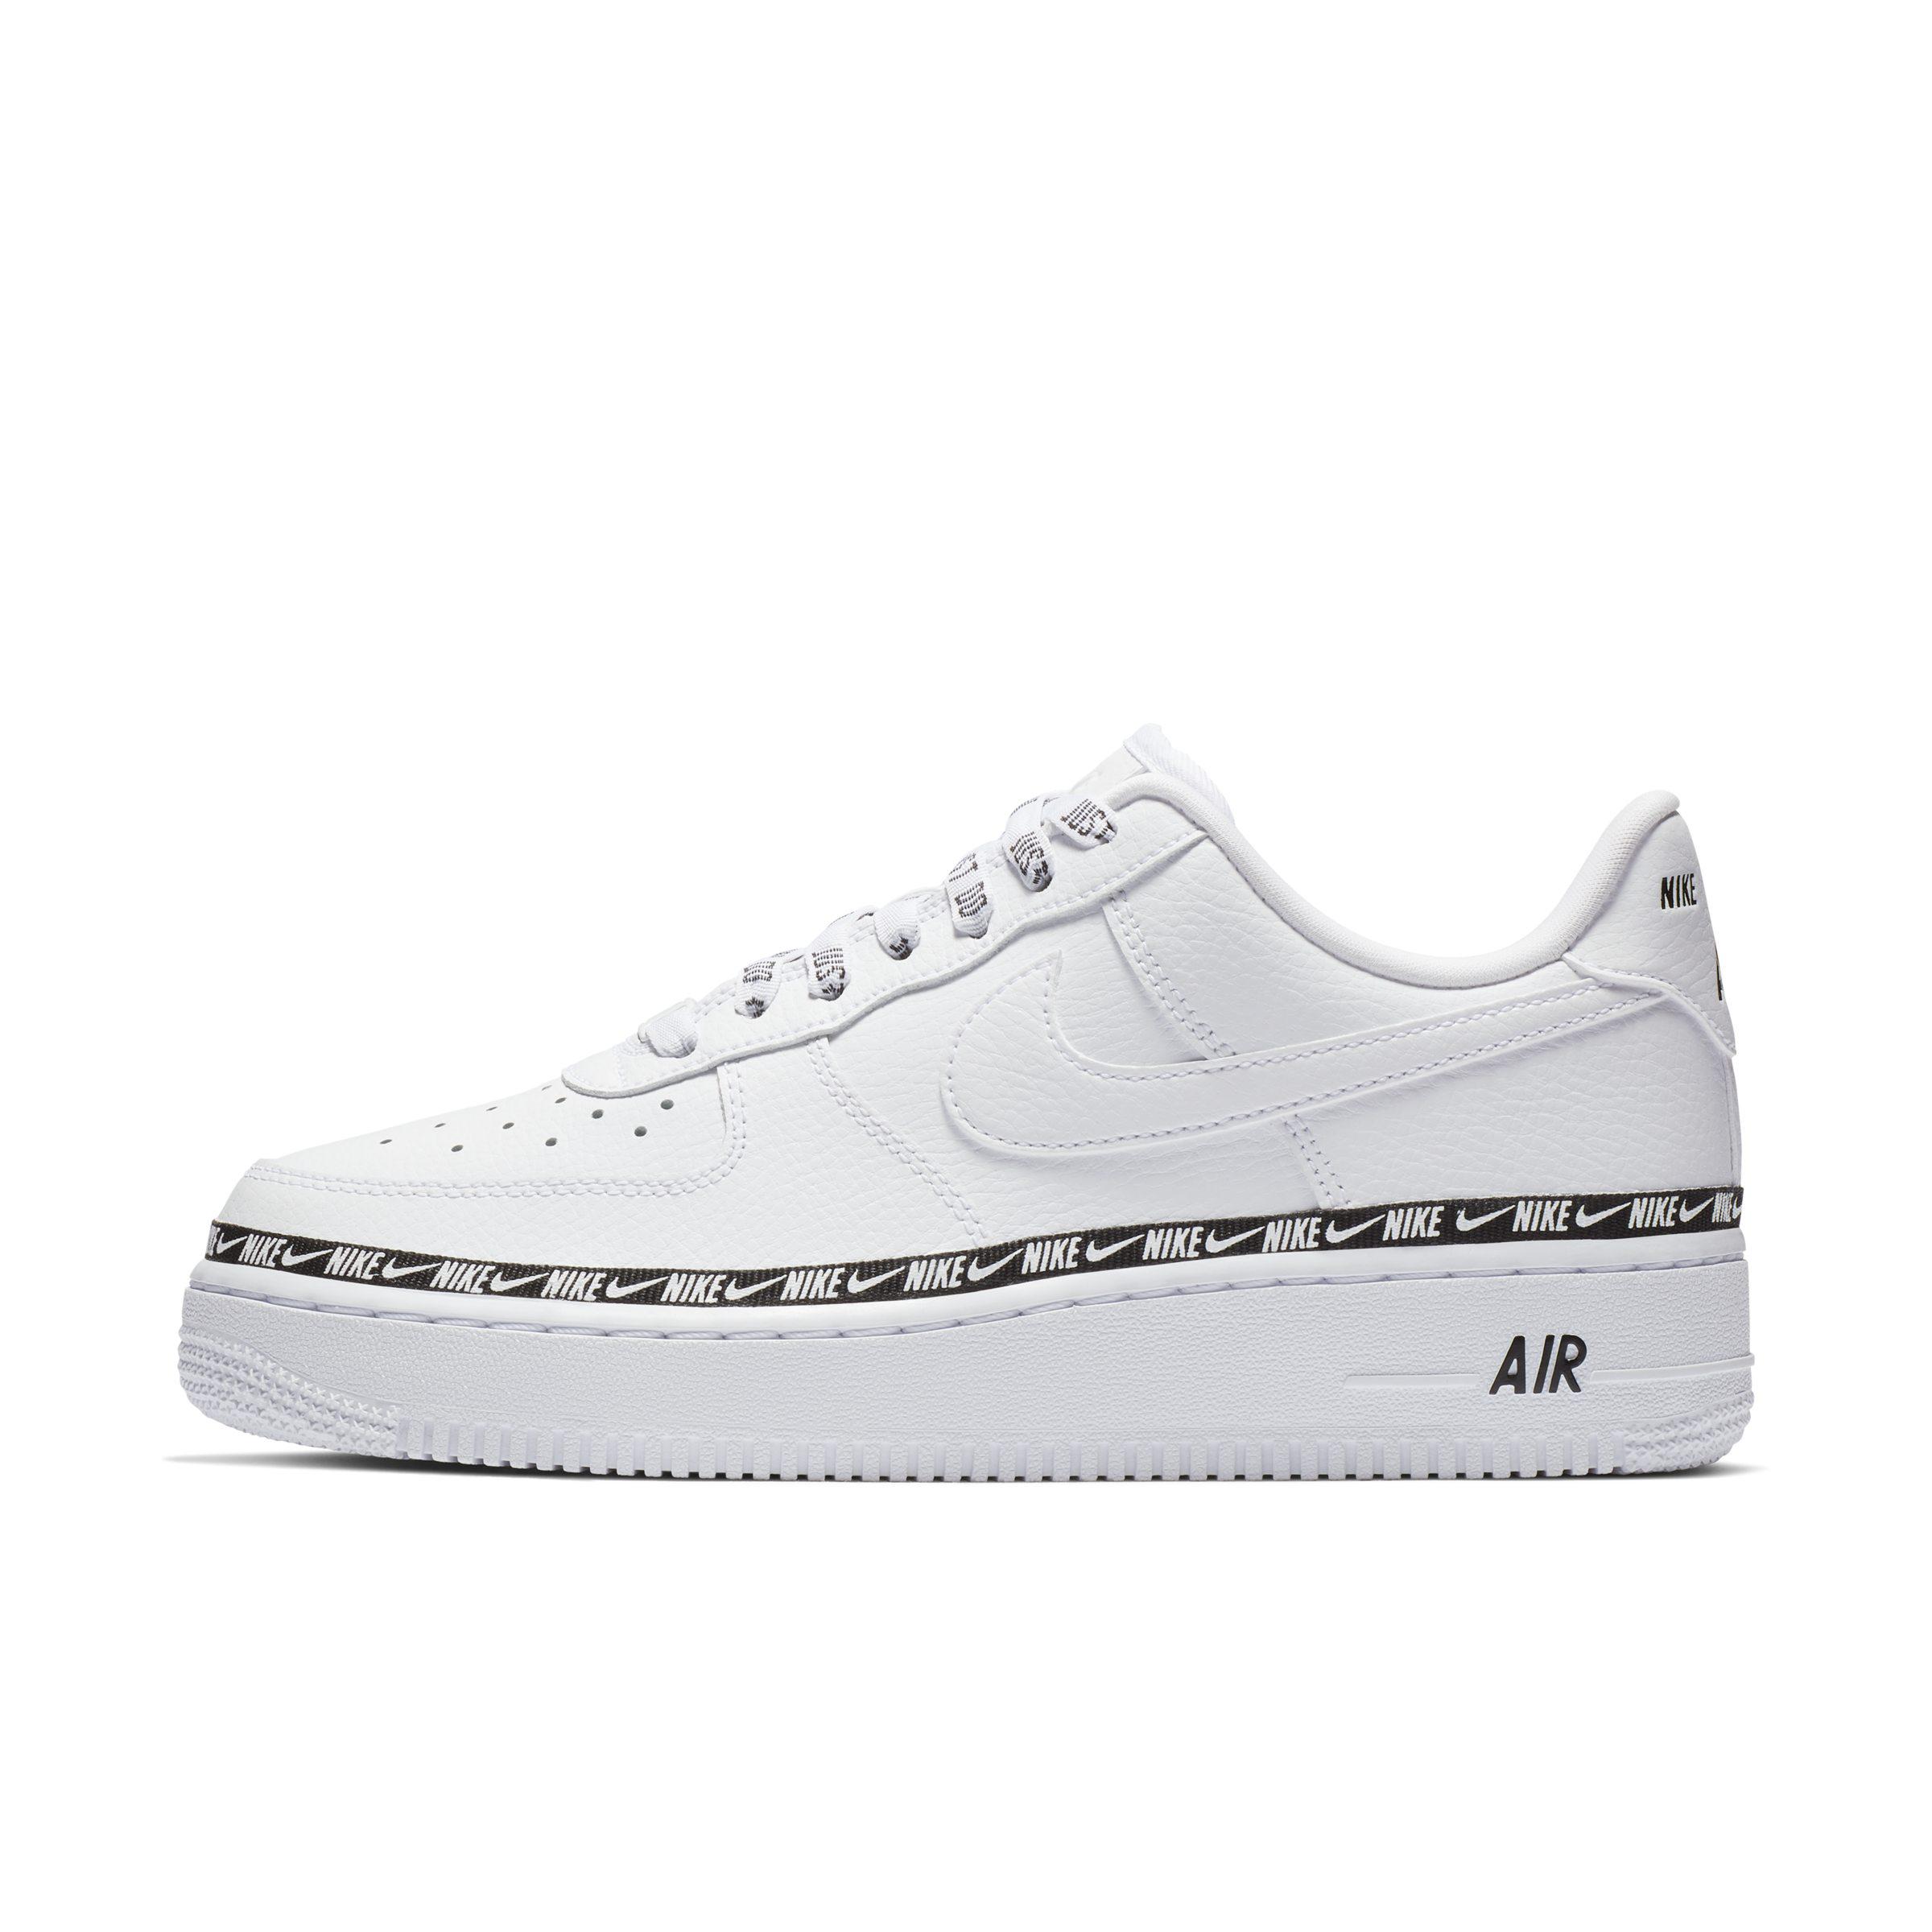 Nike Air Force 1' 07 Se Premium Shoe in White - Lyst